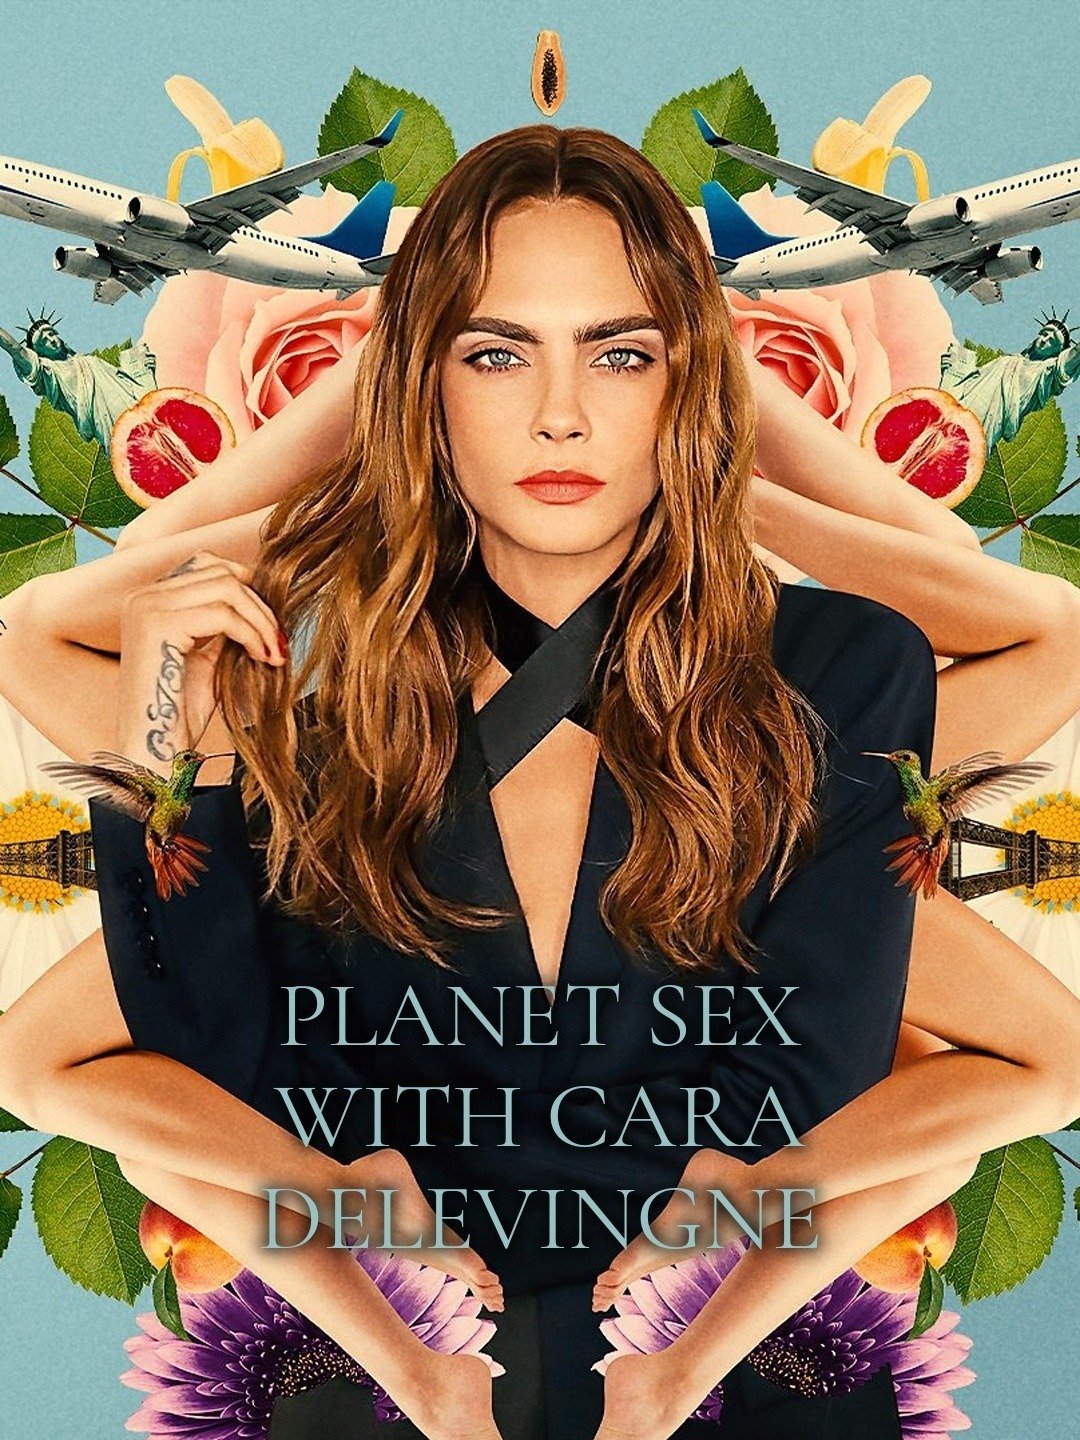 98 Sexcom - Planet Sex With Cara Delevingne - Rotten Tomatoes